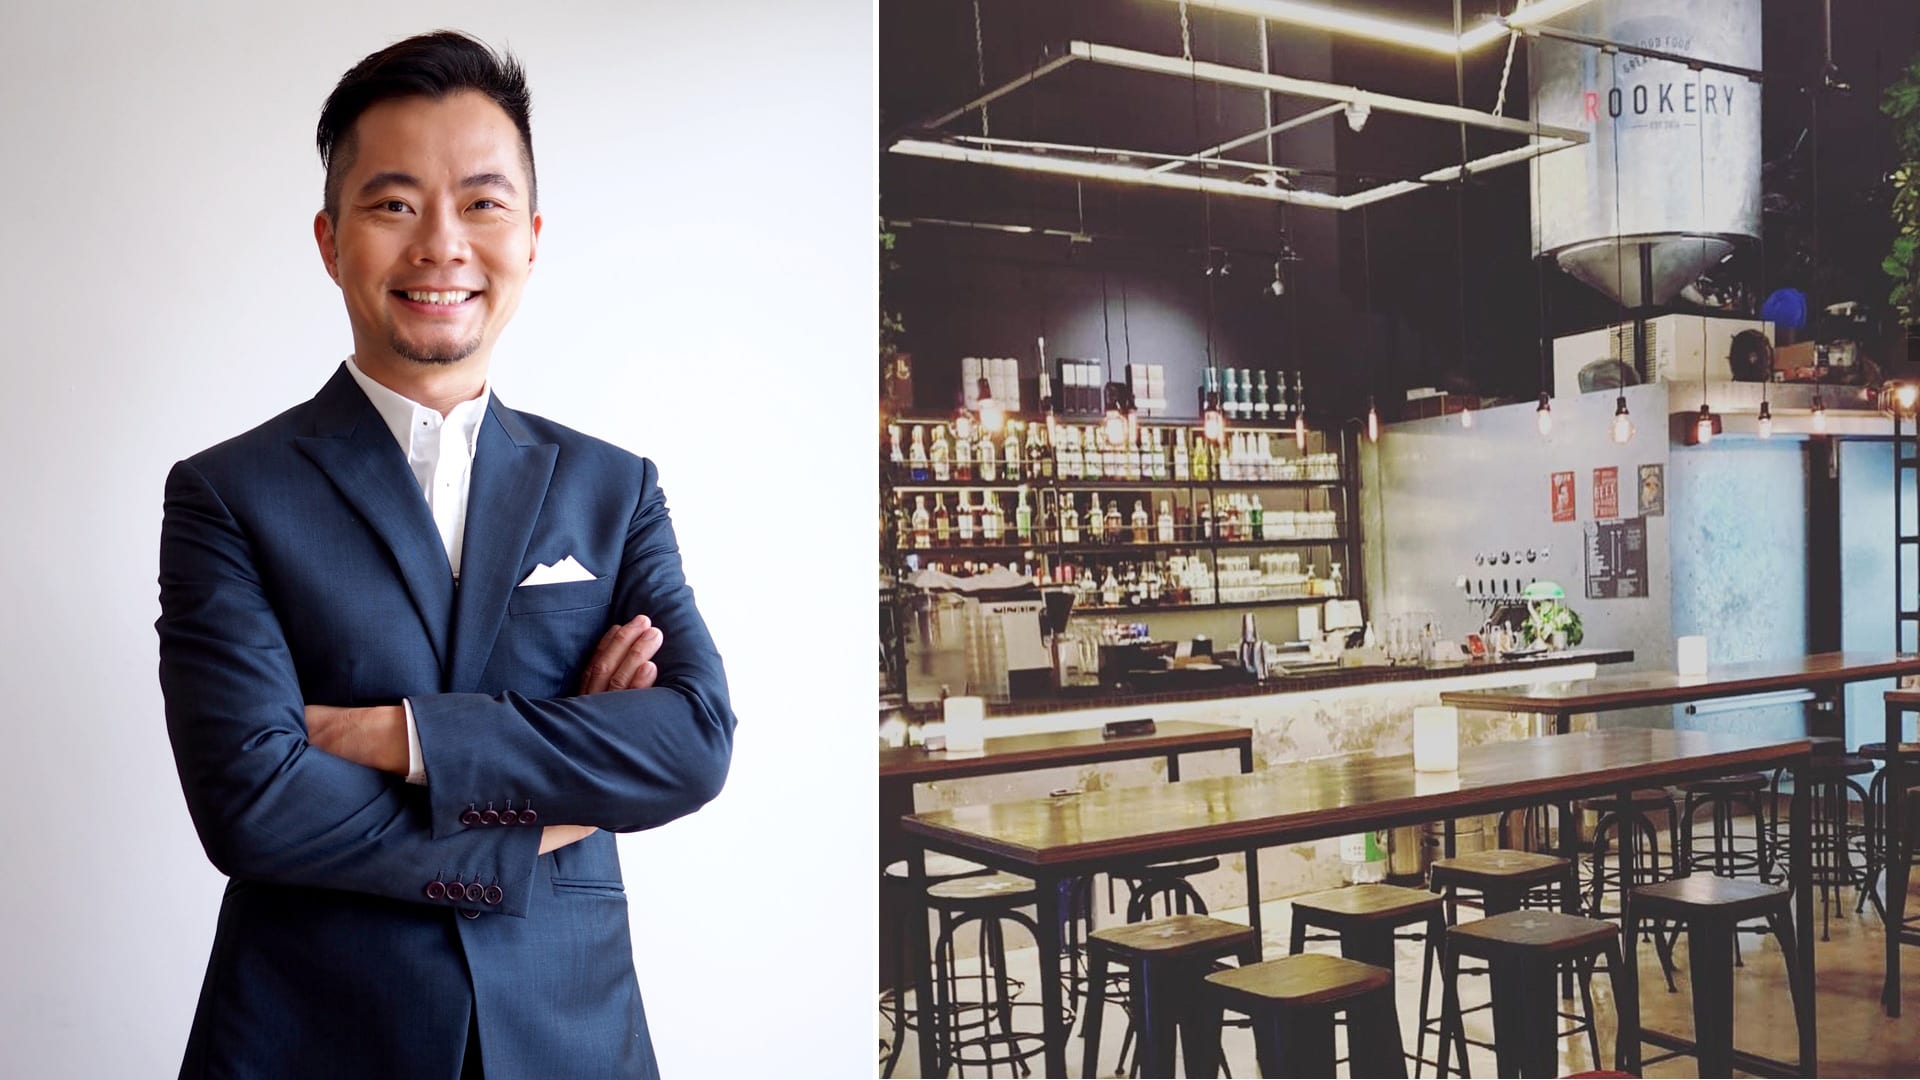 Daniel Ong Closing One Of His Eateries, Lost “Couple Hundred Thousand” So Far